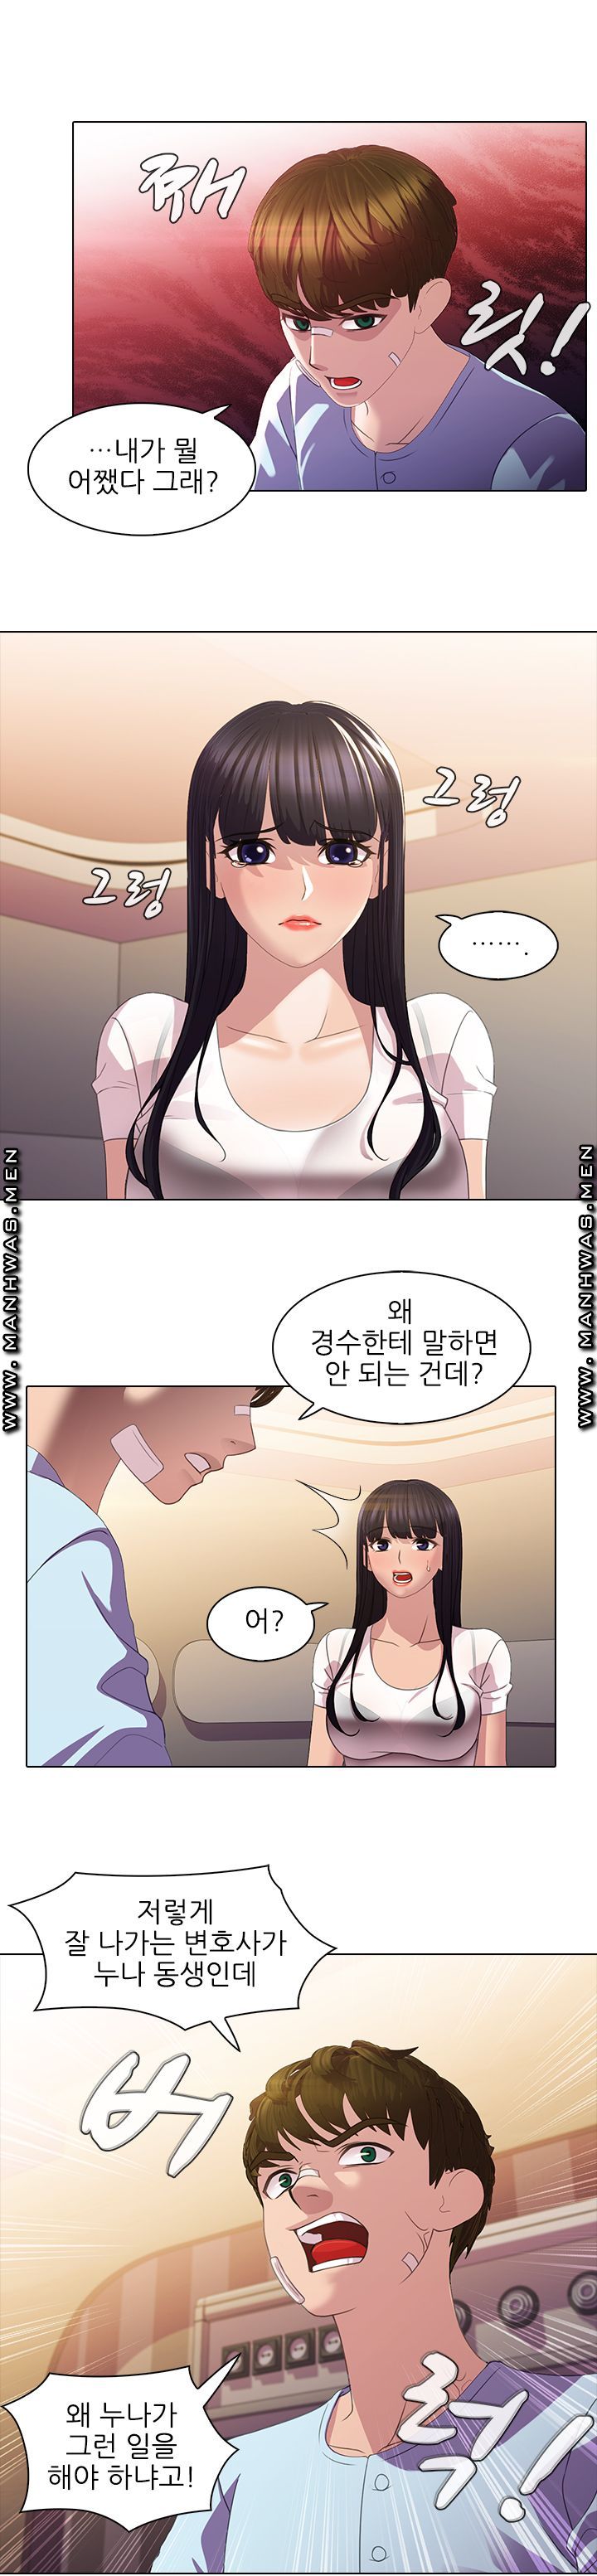 Sister's Friend Raw - Chapter 8 Page 13